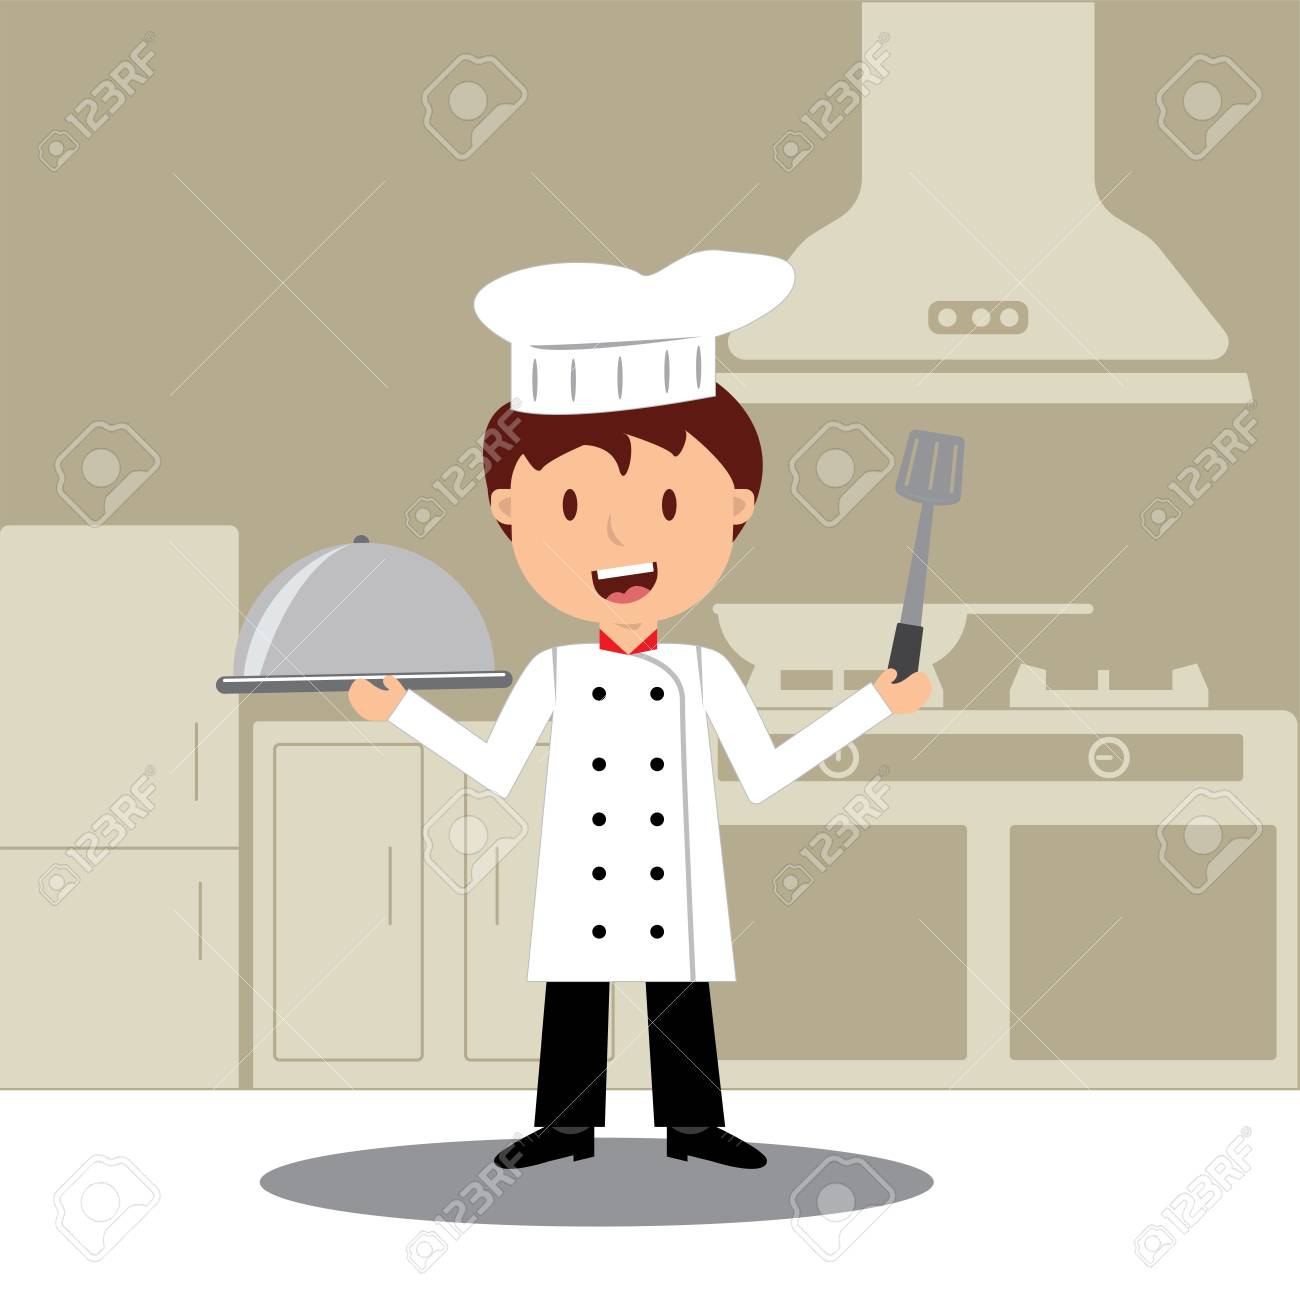 Cute Cartoon Of Little Chef Cooking At Kitchen Royalty SVG 1300x1300